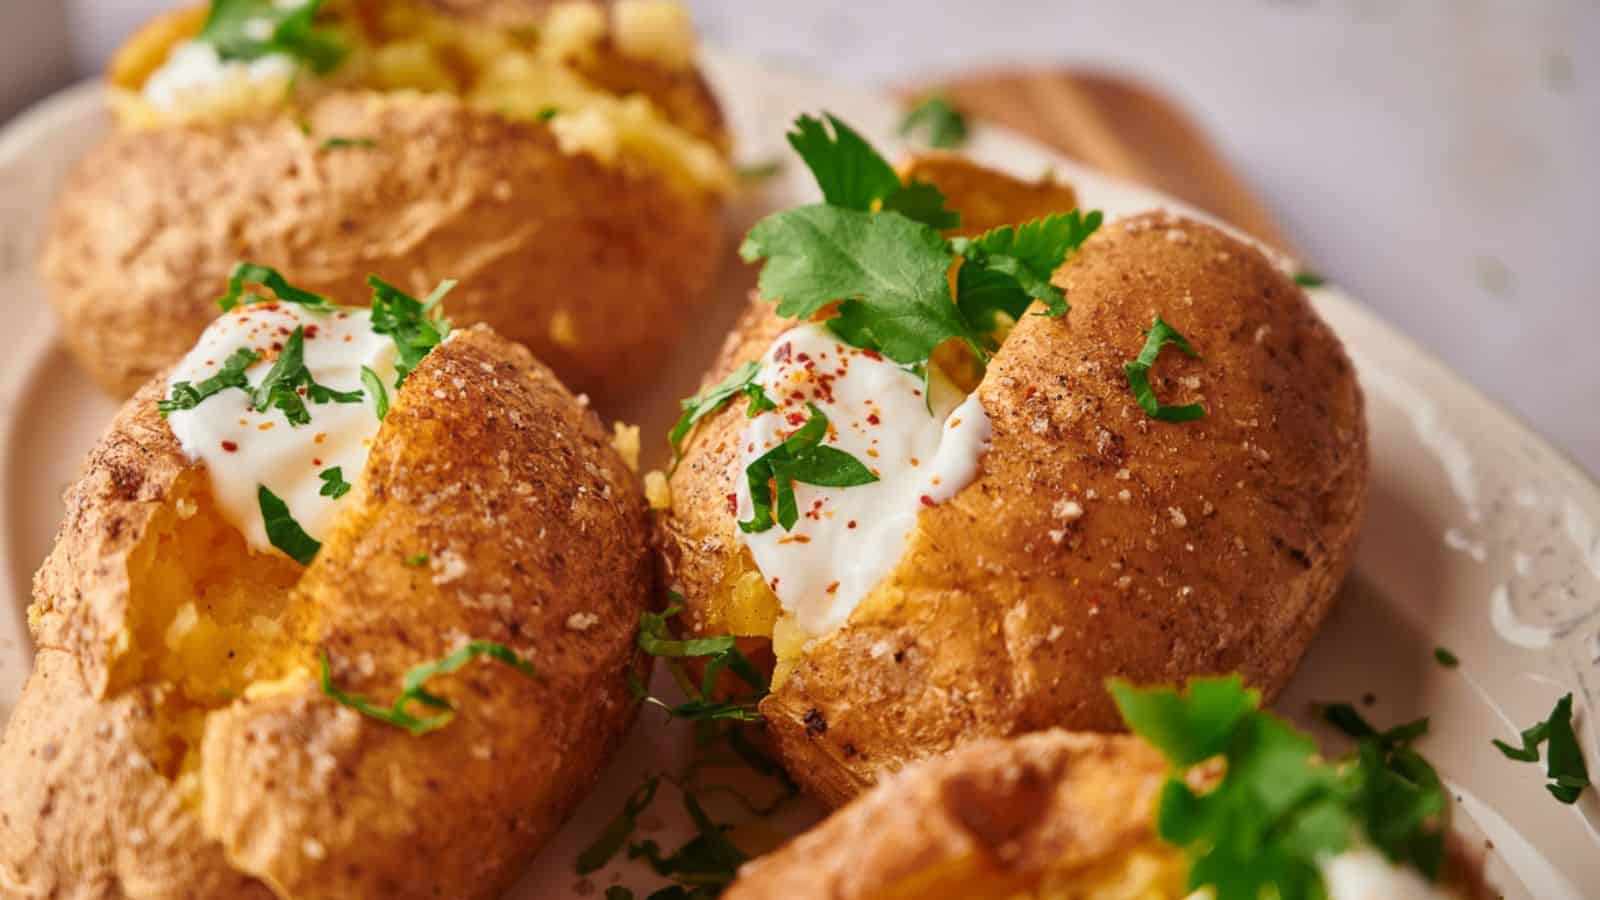 Baked potatoes on a serving dish with sour cream and fresh parsley.